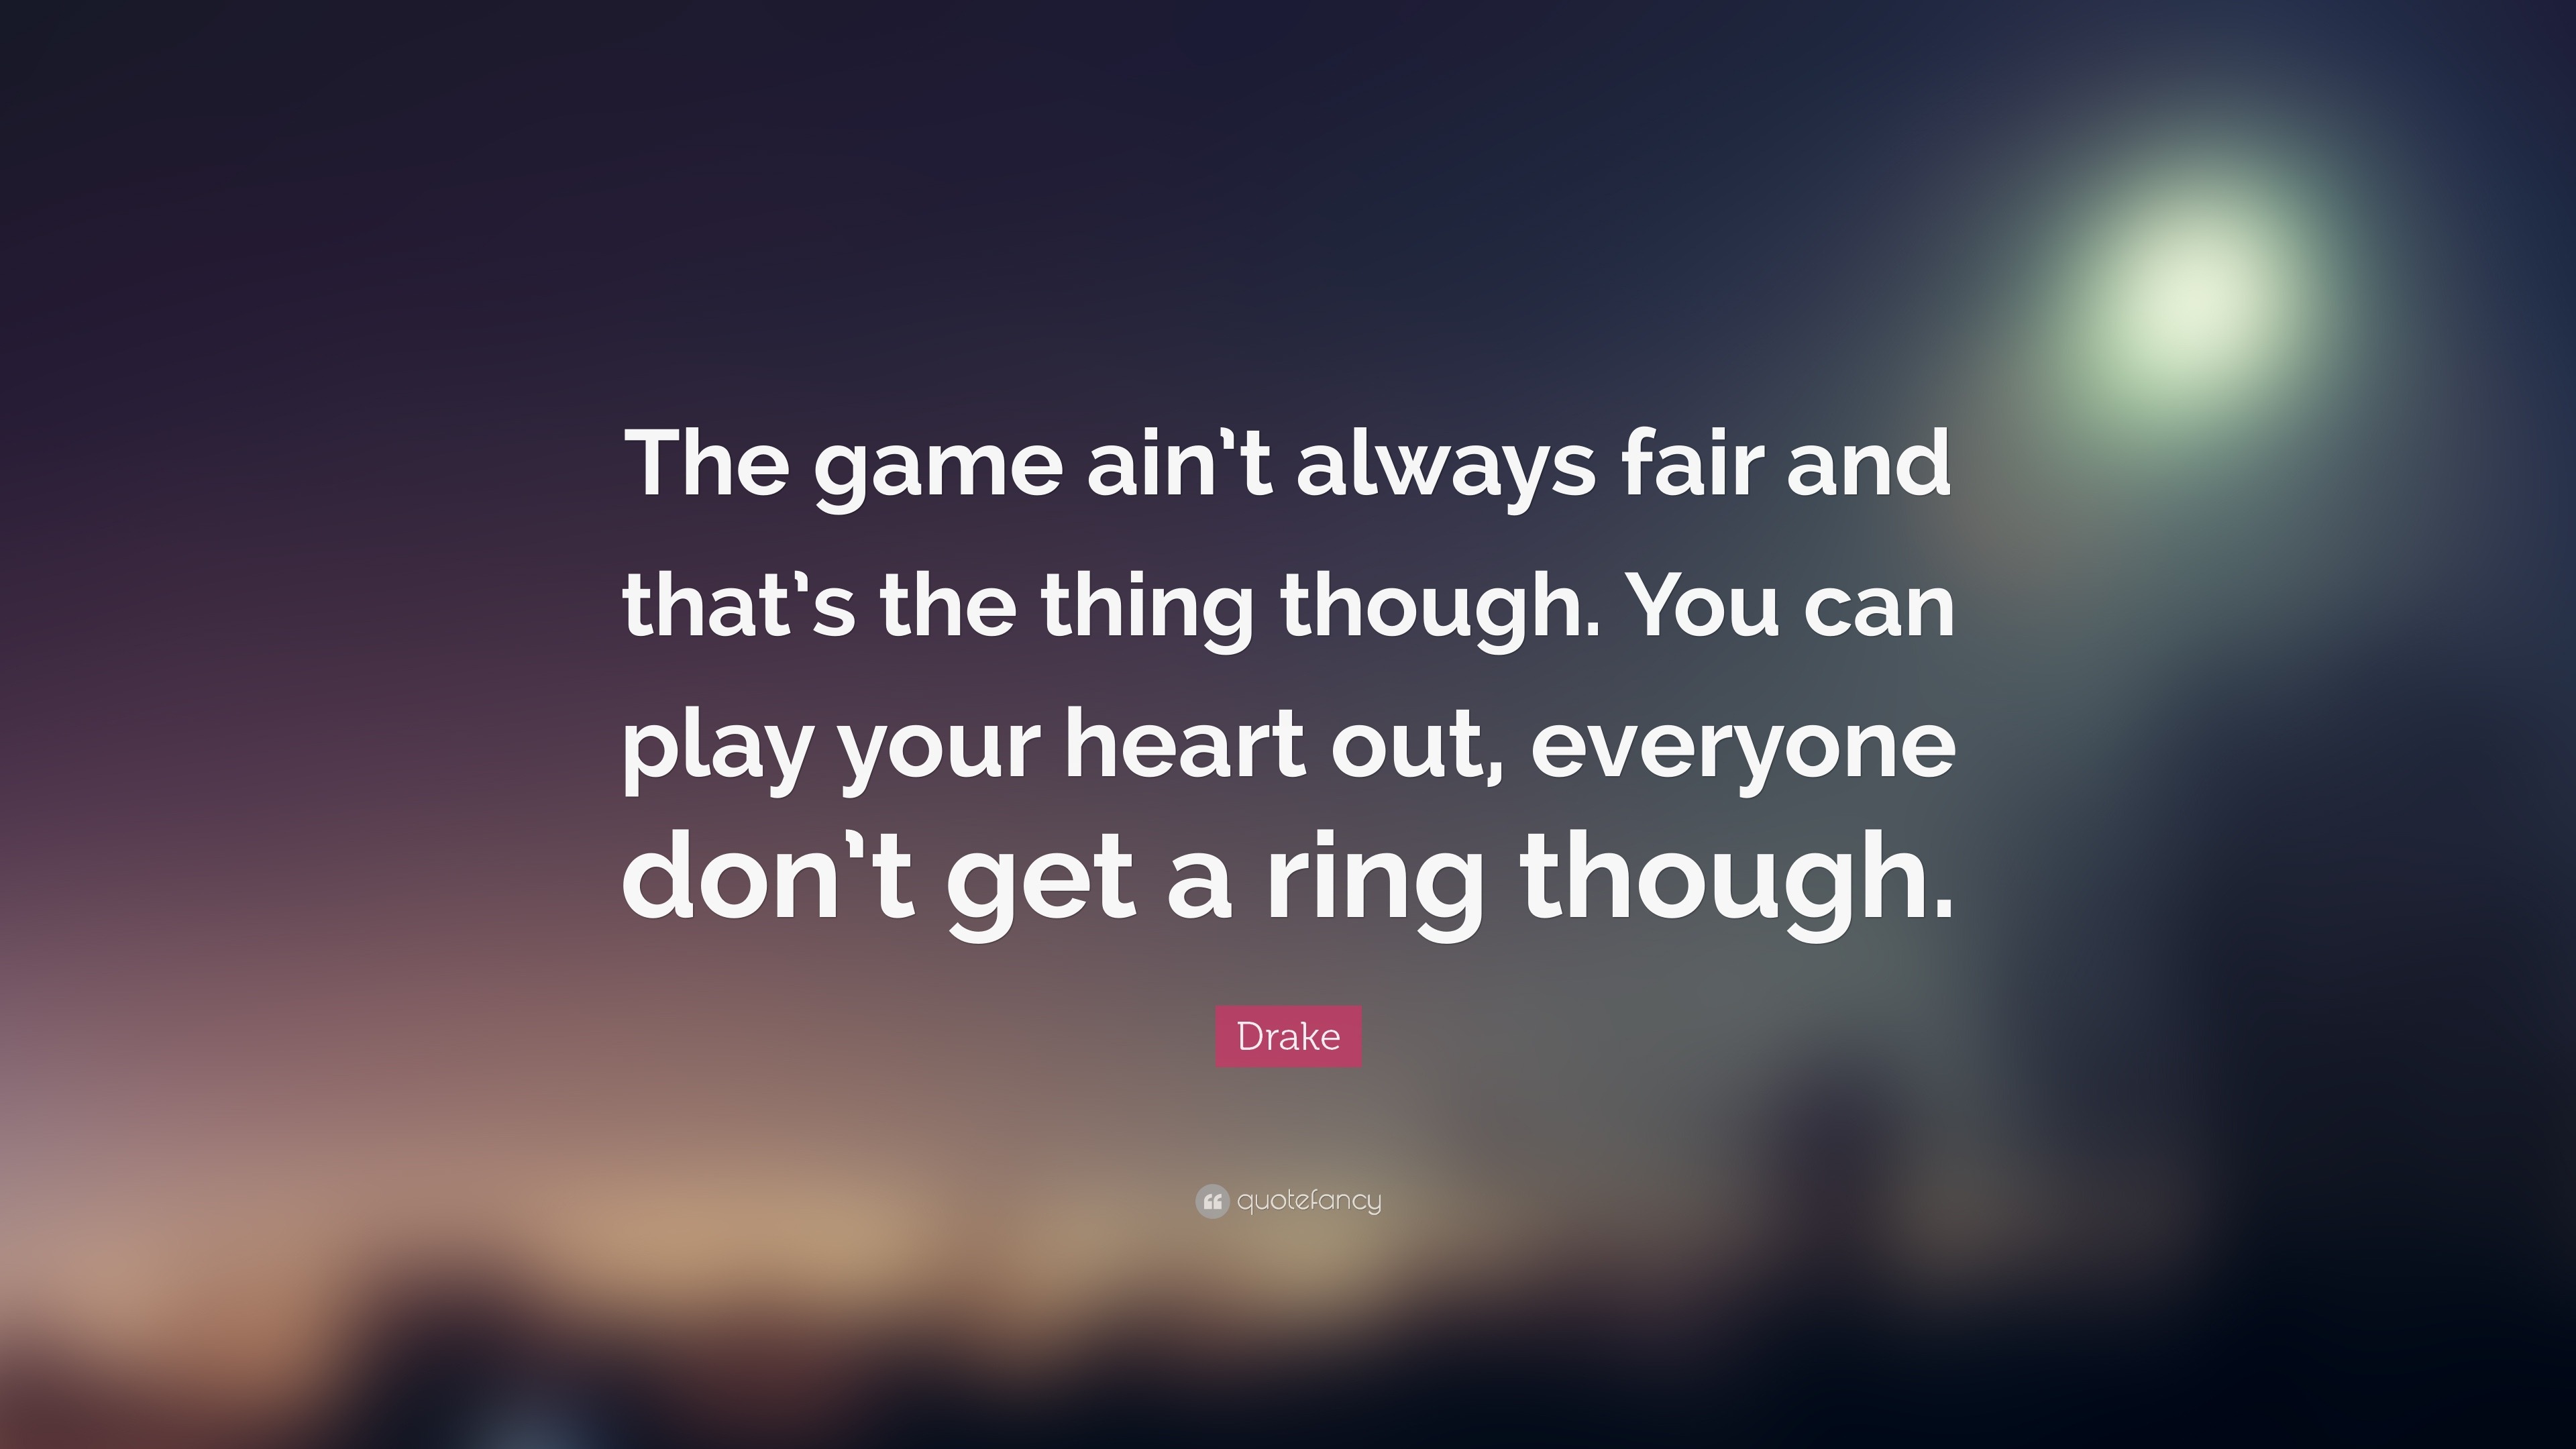 Quit playing games with my heart  Drake quotes, Inspirational quotes, Words